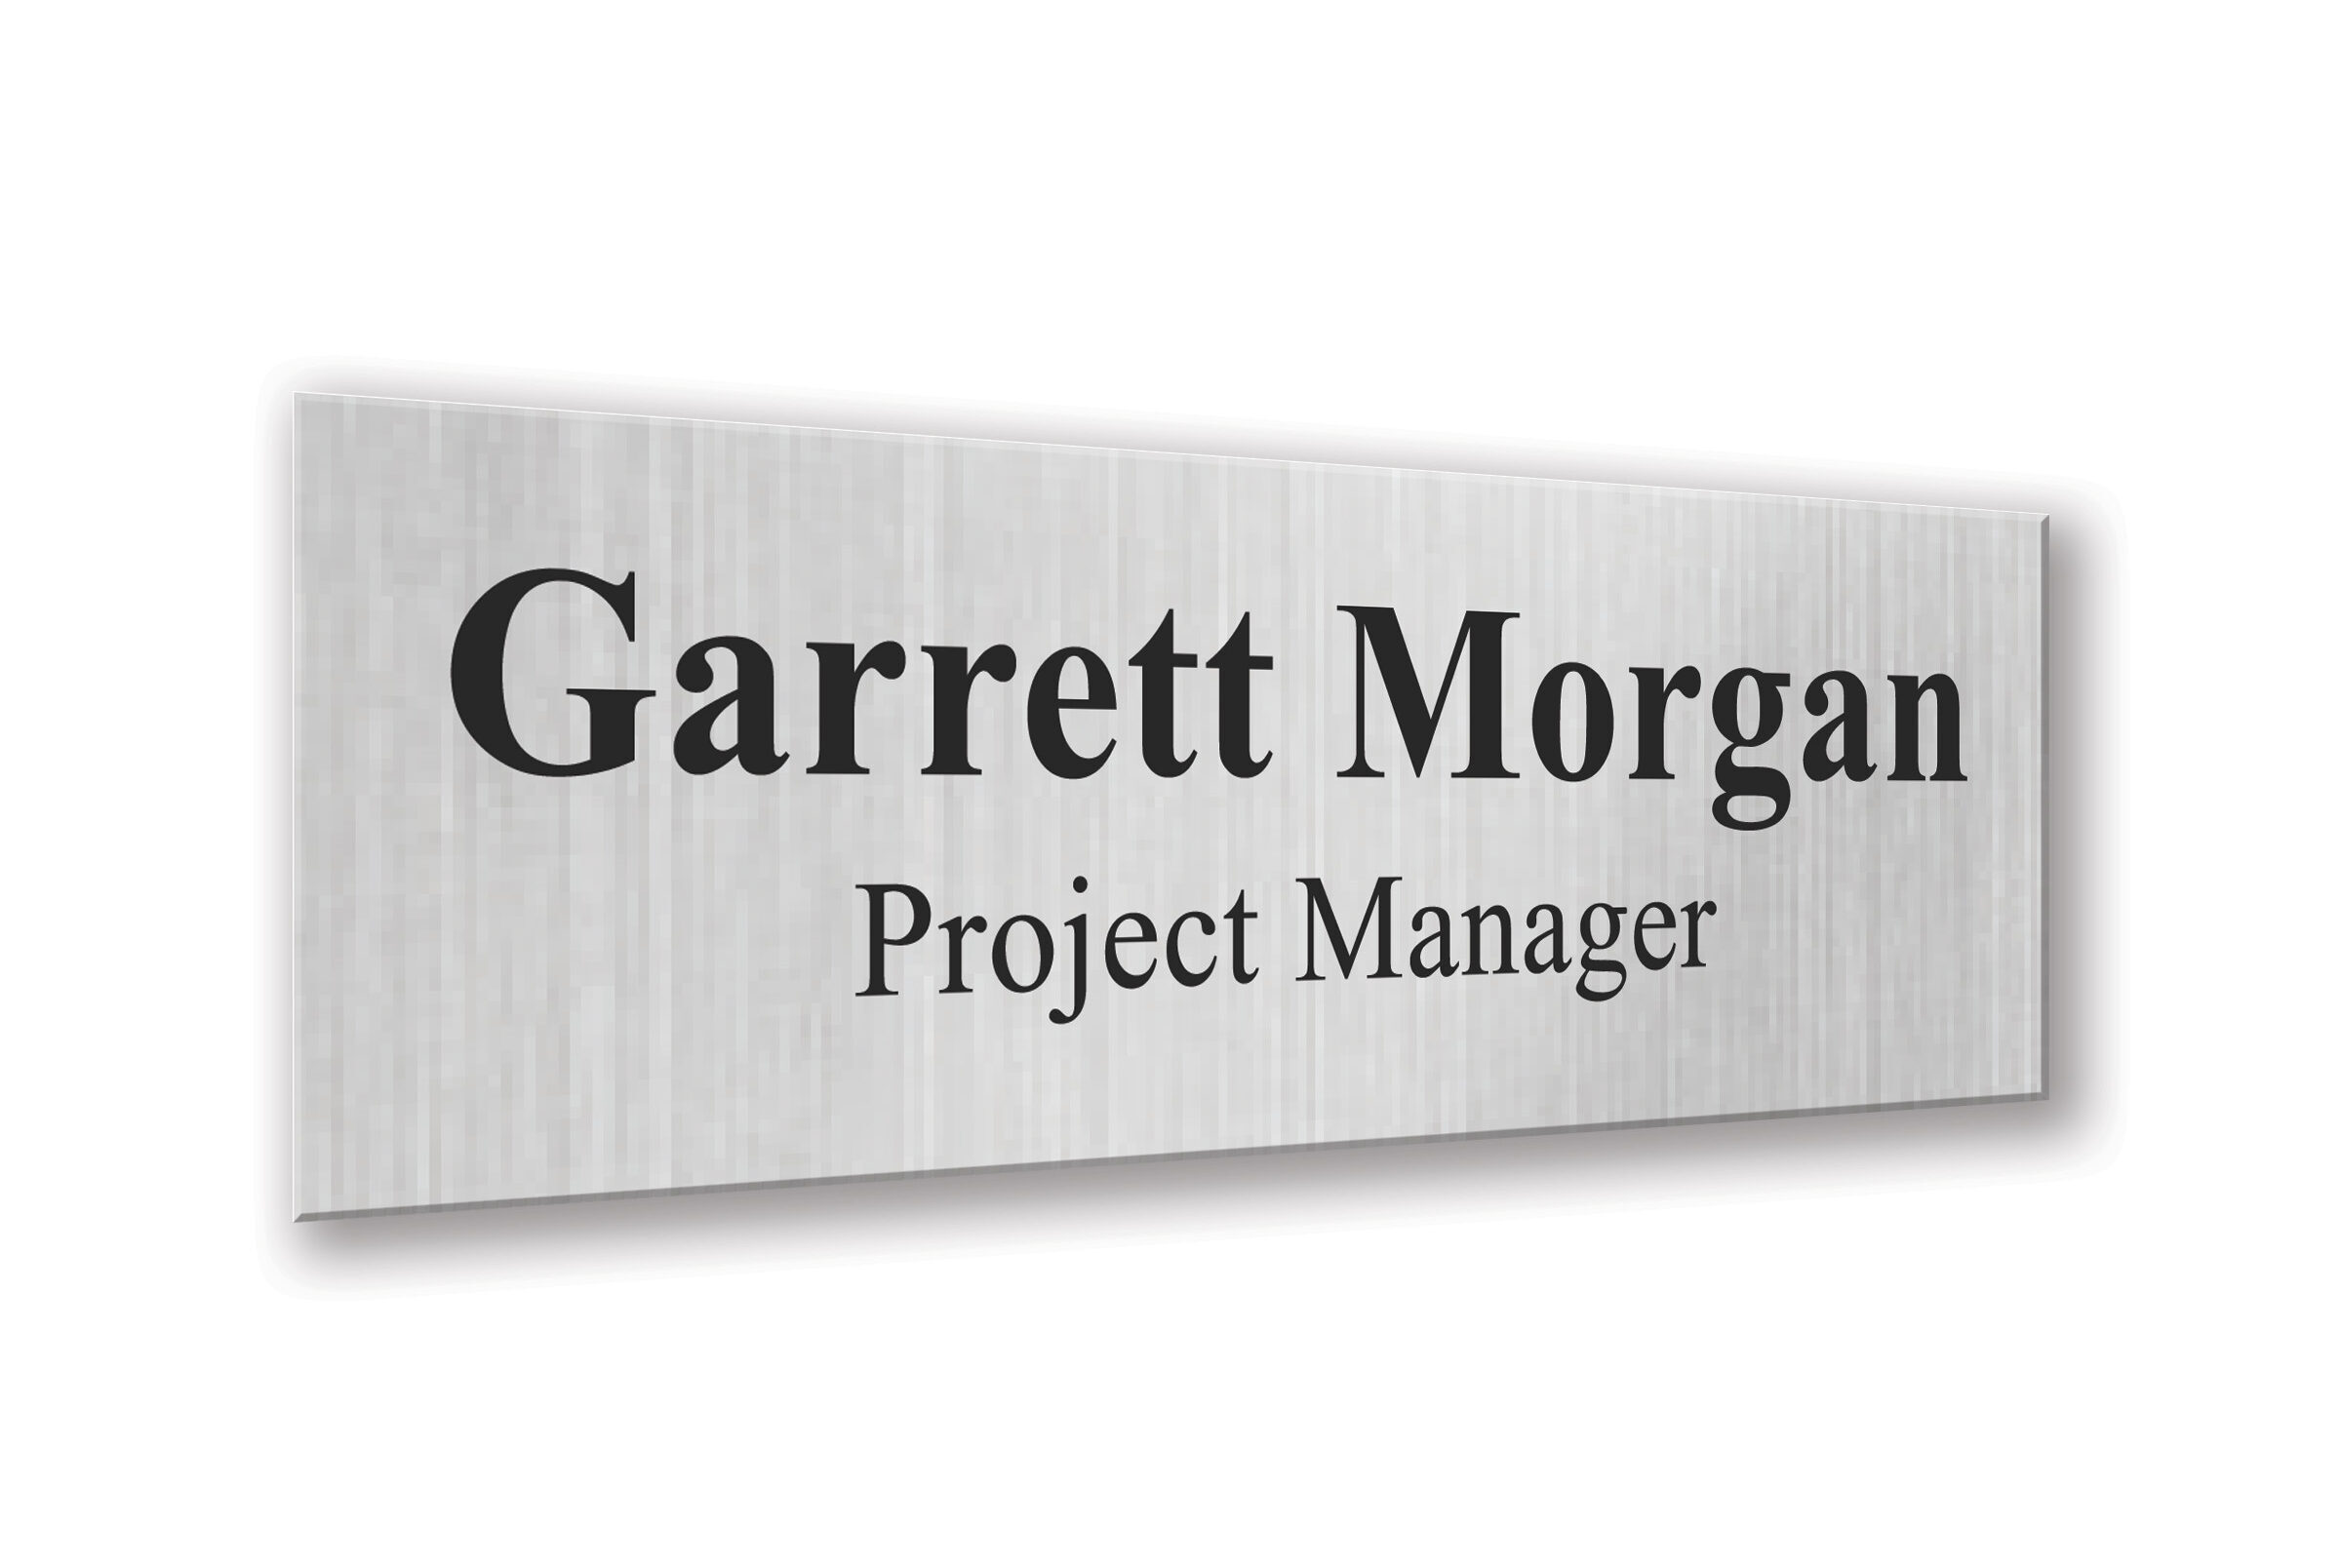 Office name plates reflecting professionalism and personalized branding.